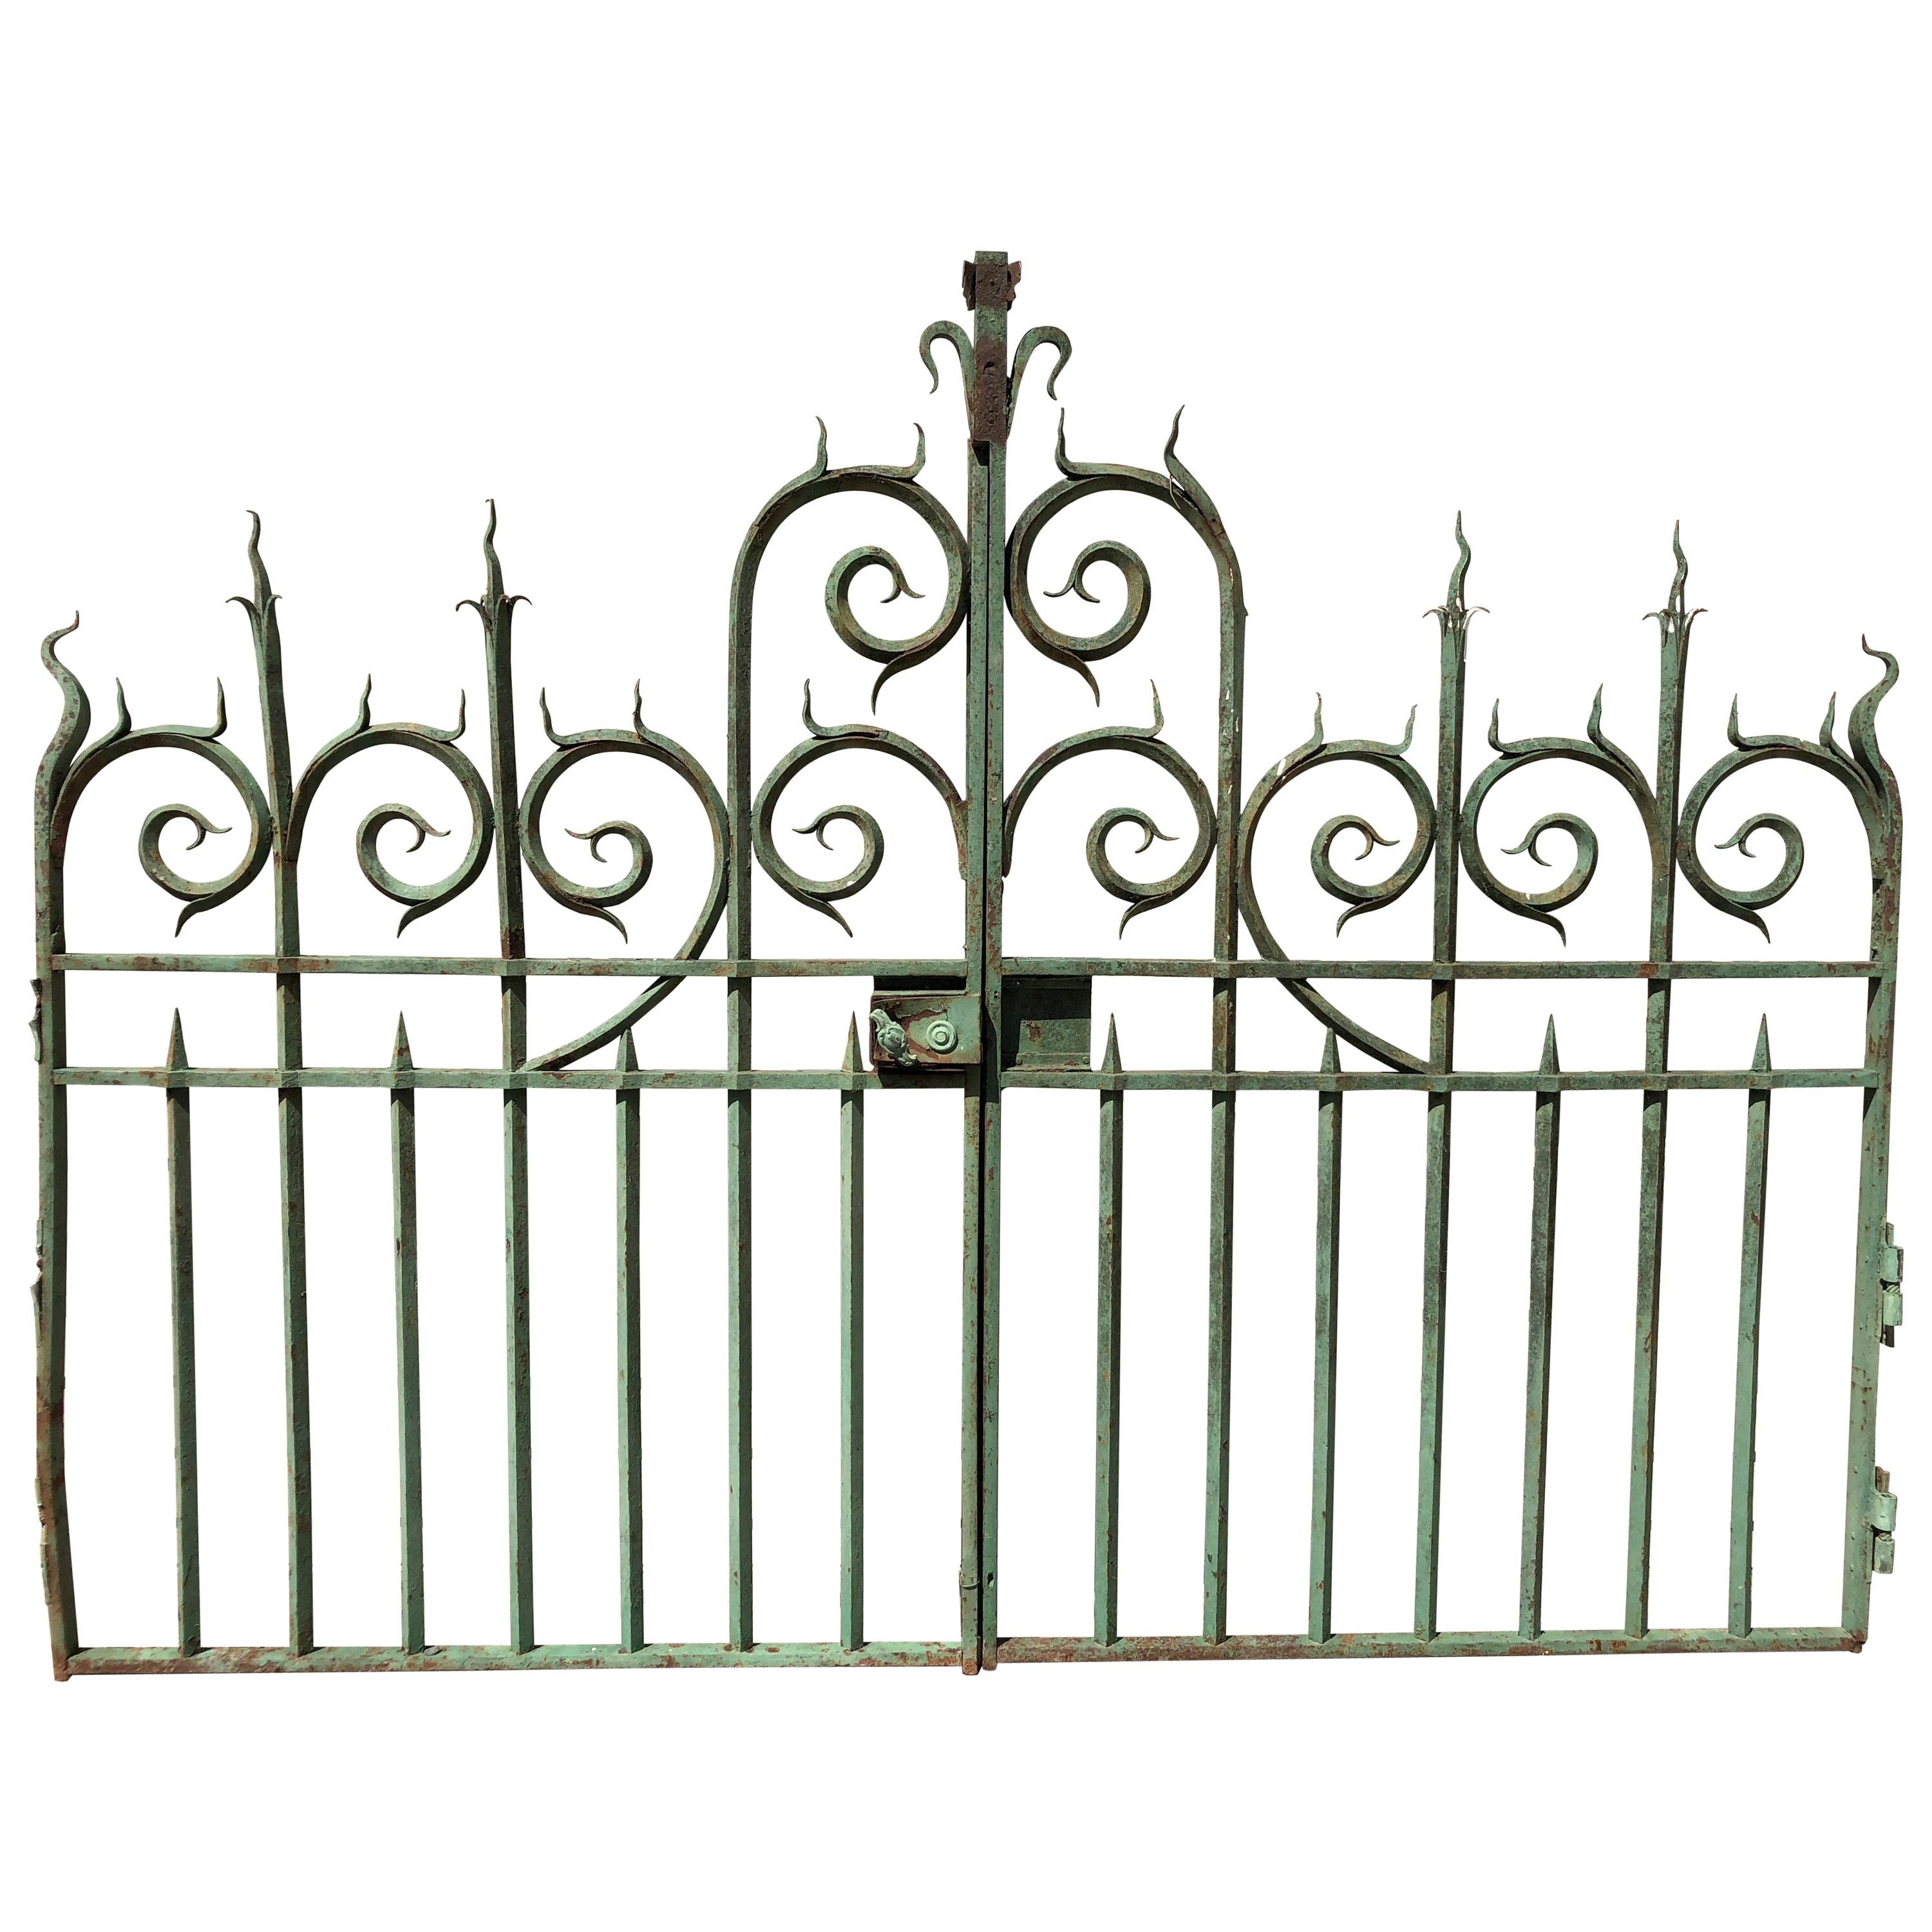 Pair of 19th Century French Wrought Iron Vineyard Entrance Gates from Bordeaux